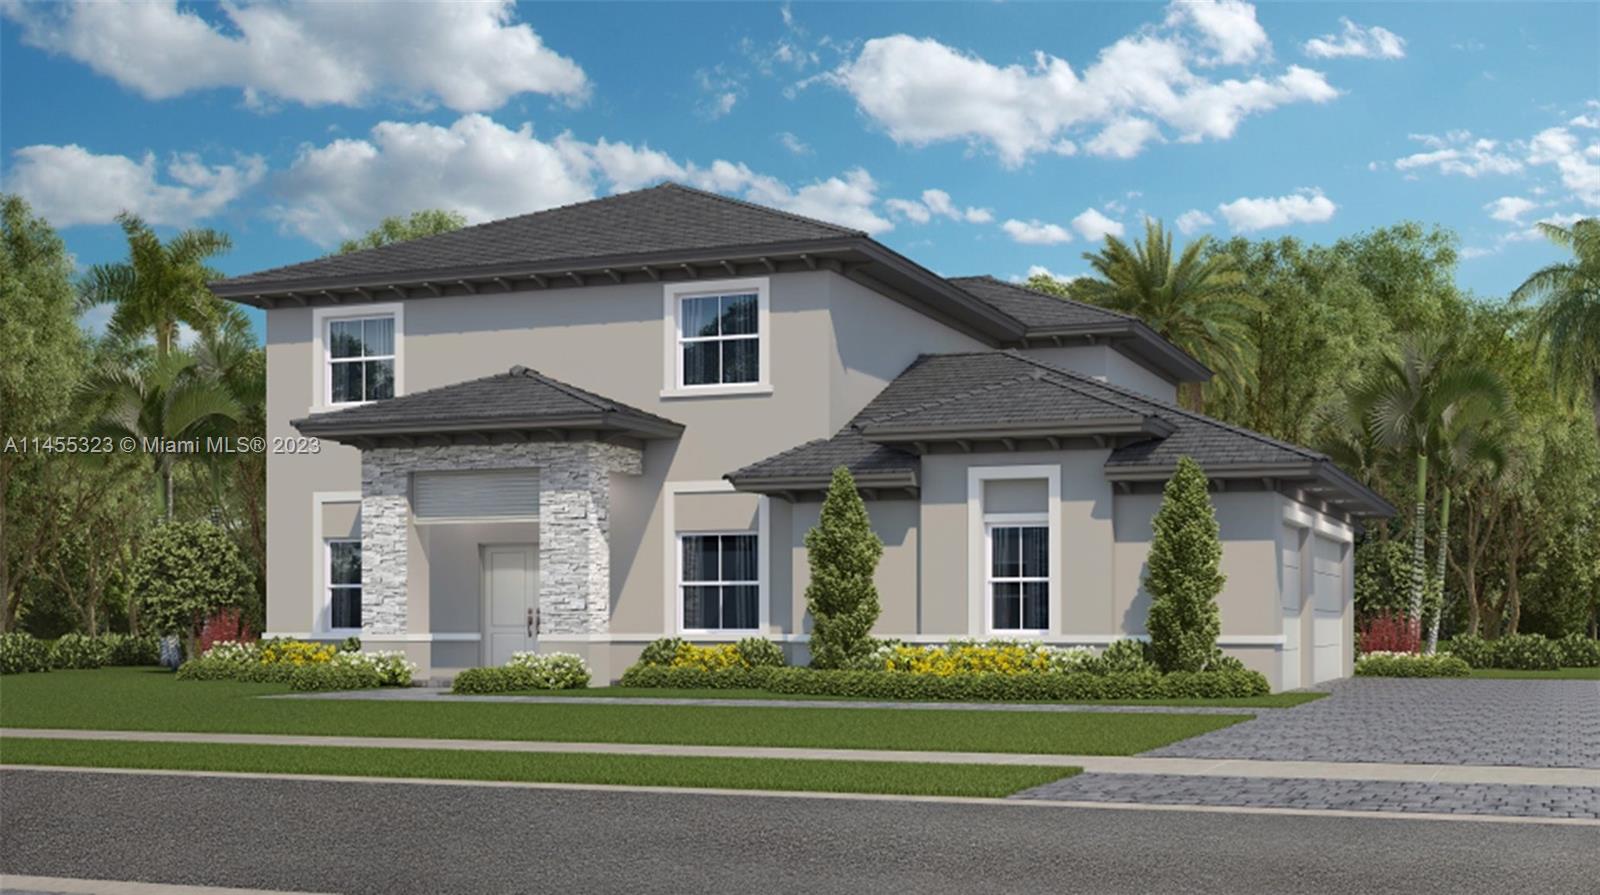 Welcome to Sedona Estates, a beautiful community of new single-family homes for sale in Miami, FL, offering the best in South Florida living.